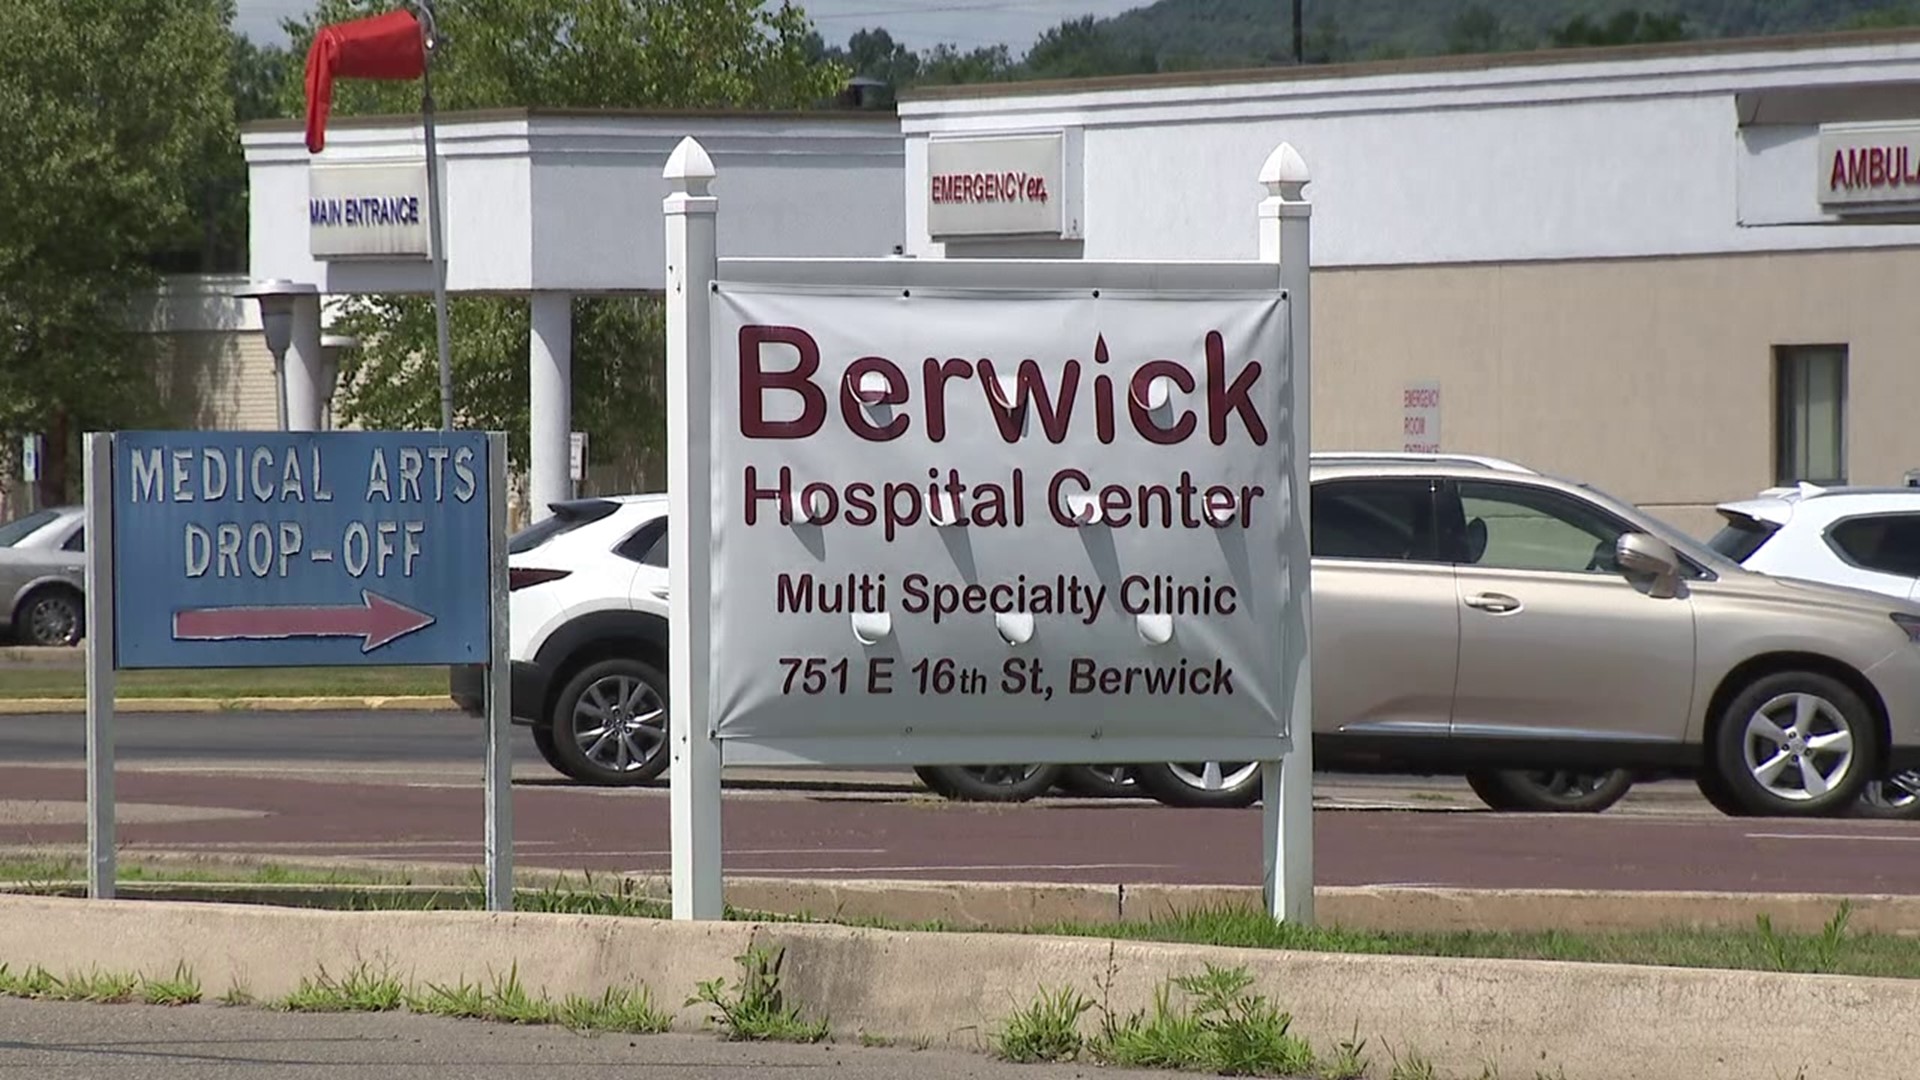 A hospital in Berwick is closing, leaving employees and patients wondering what happens next.